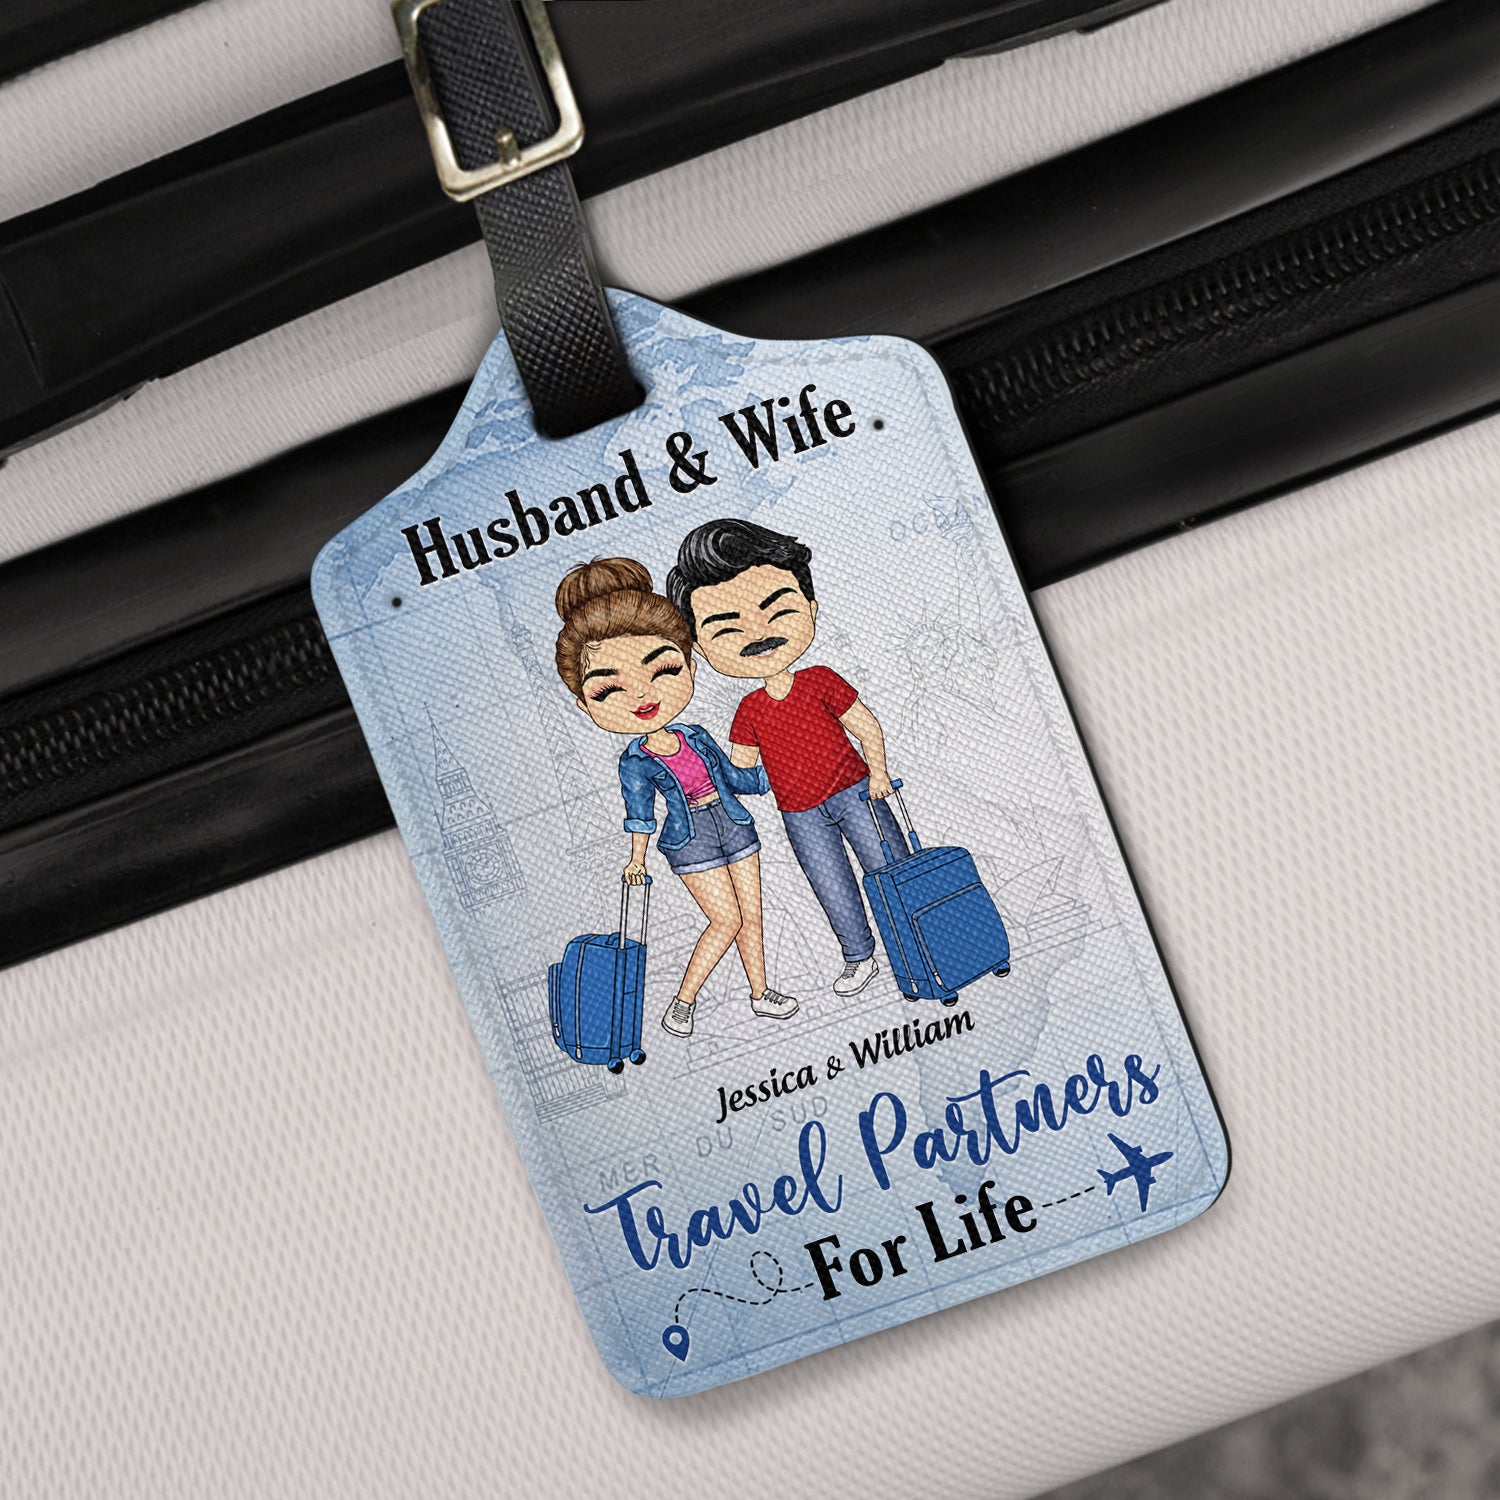 Husband & Wife Travel Partners For Life - Gift For Couples - Personalized Luggage Tag